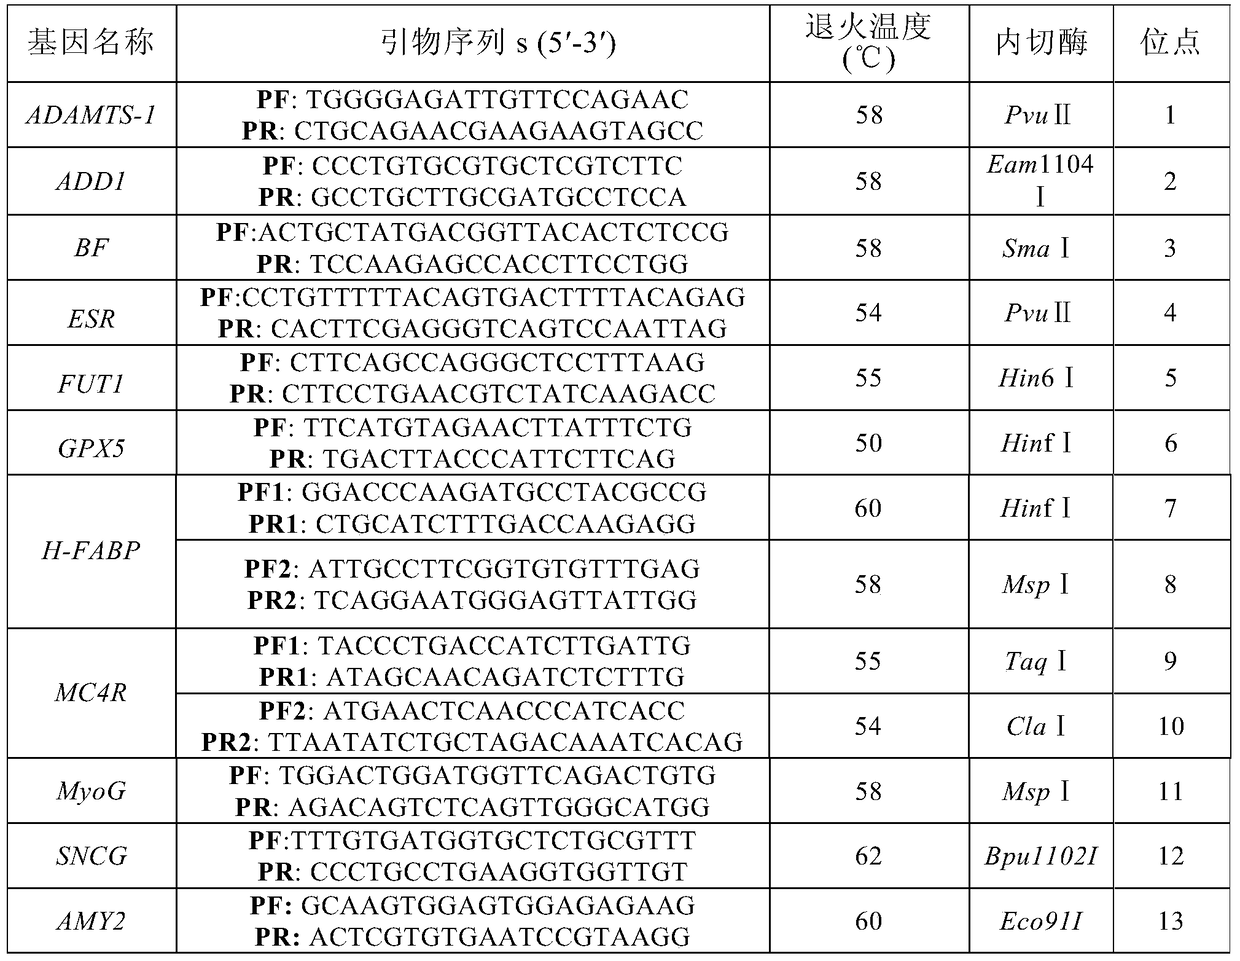 A SNP molecular marker for traceability on pig chromosome 6 and its application